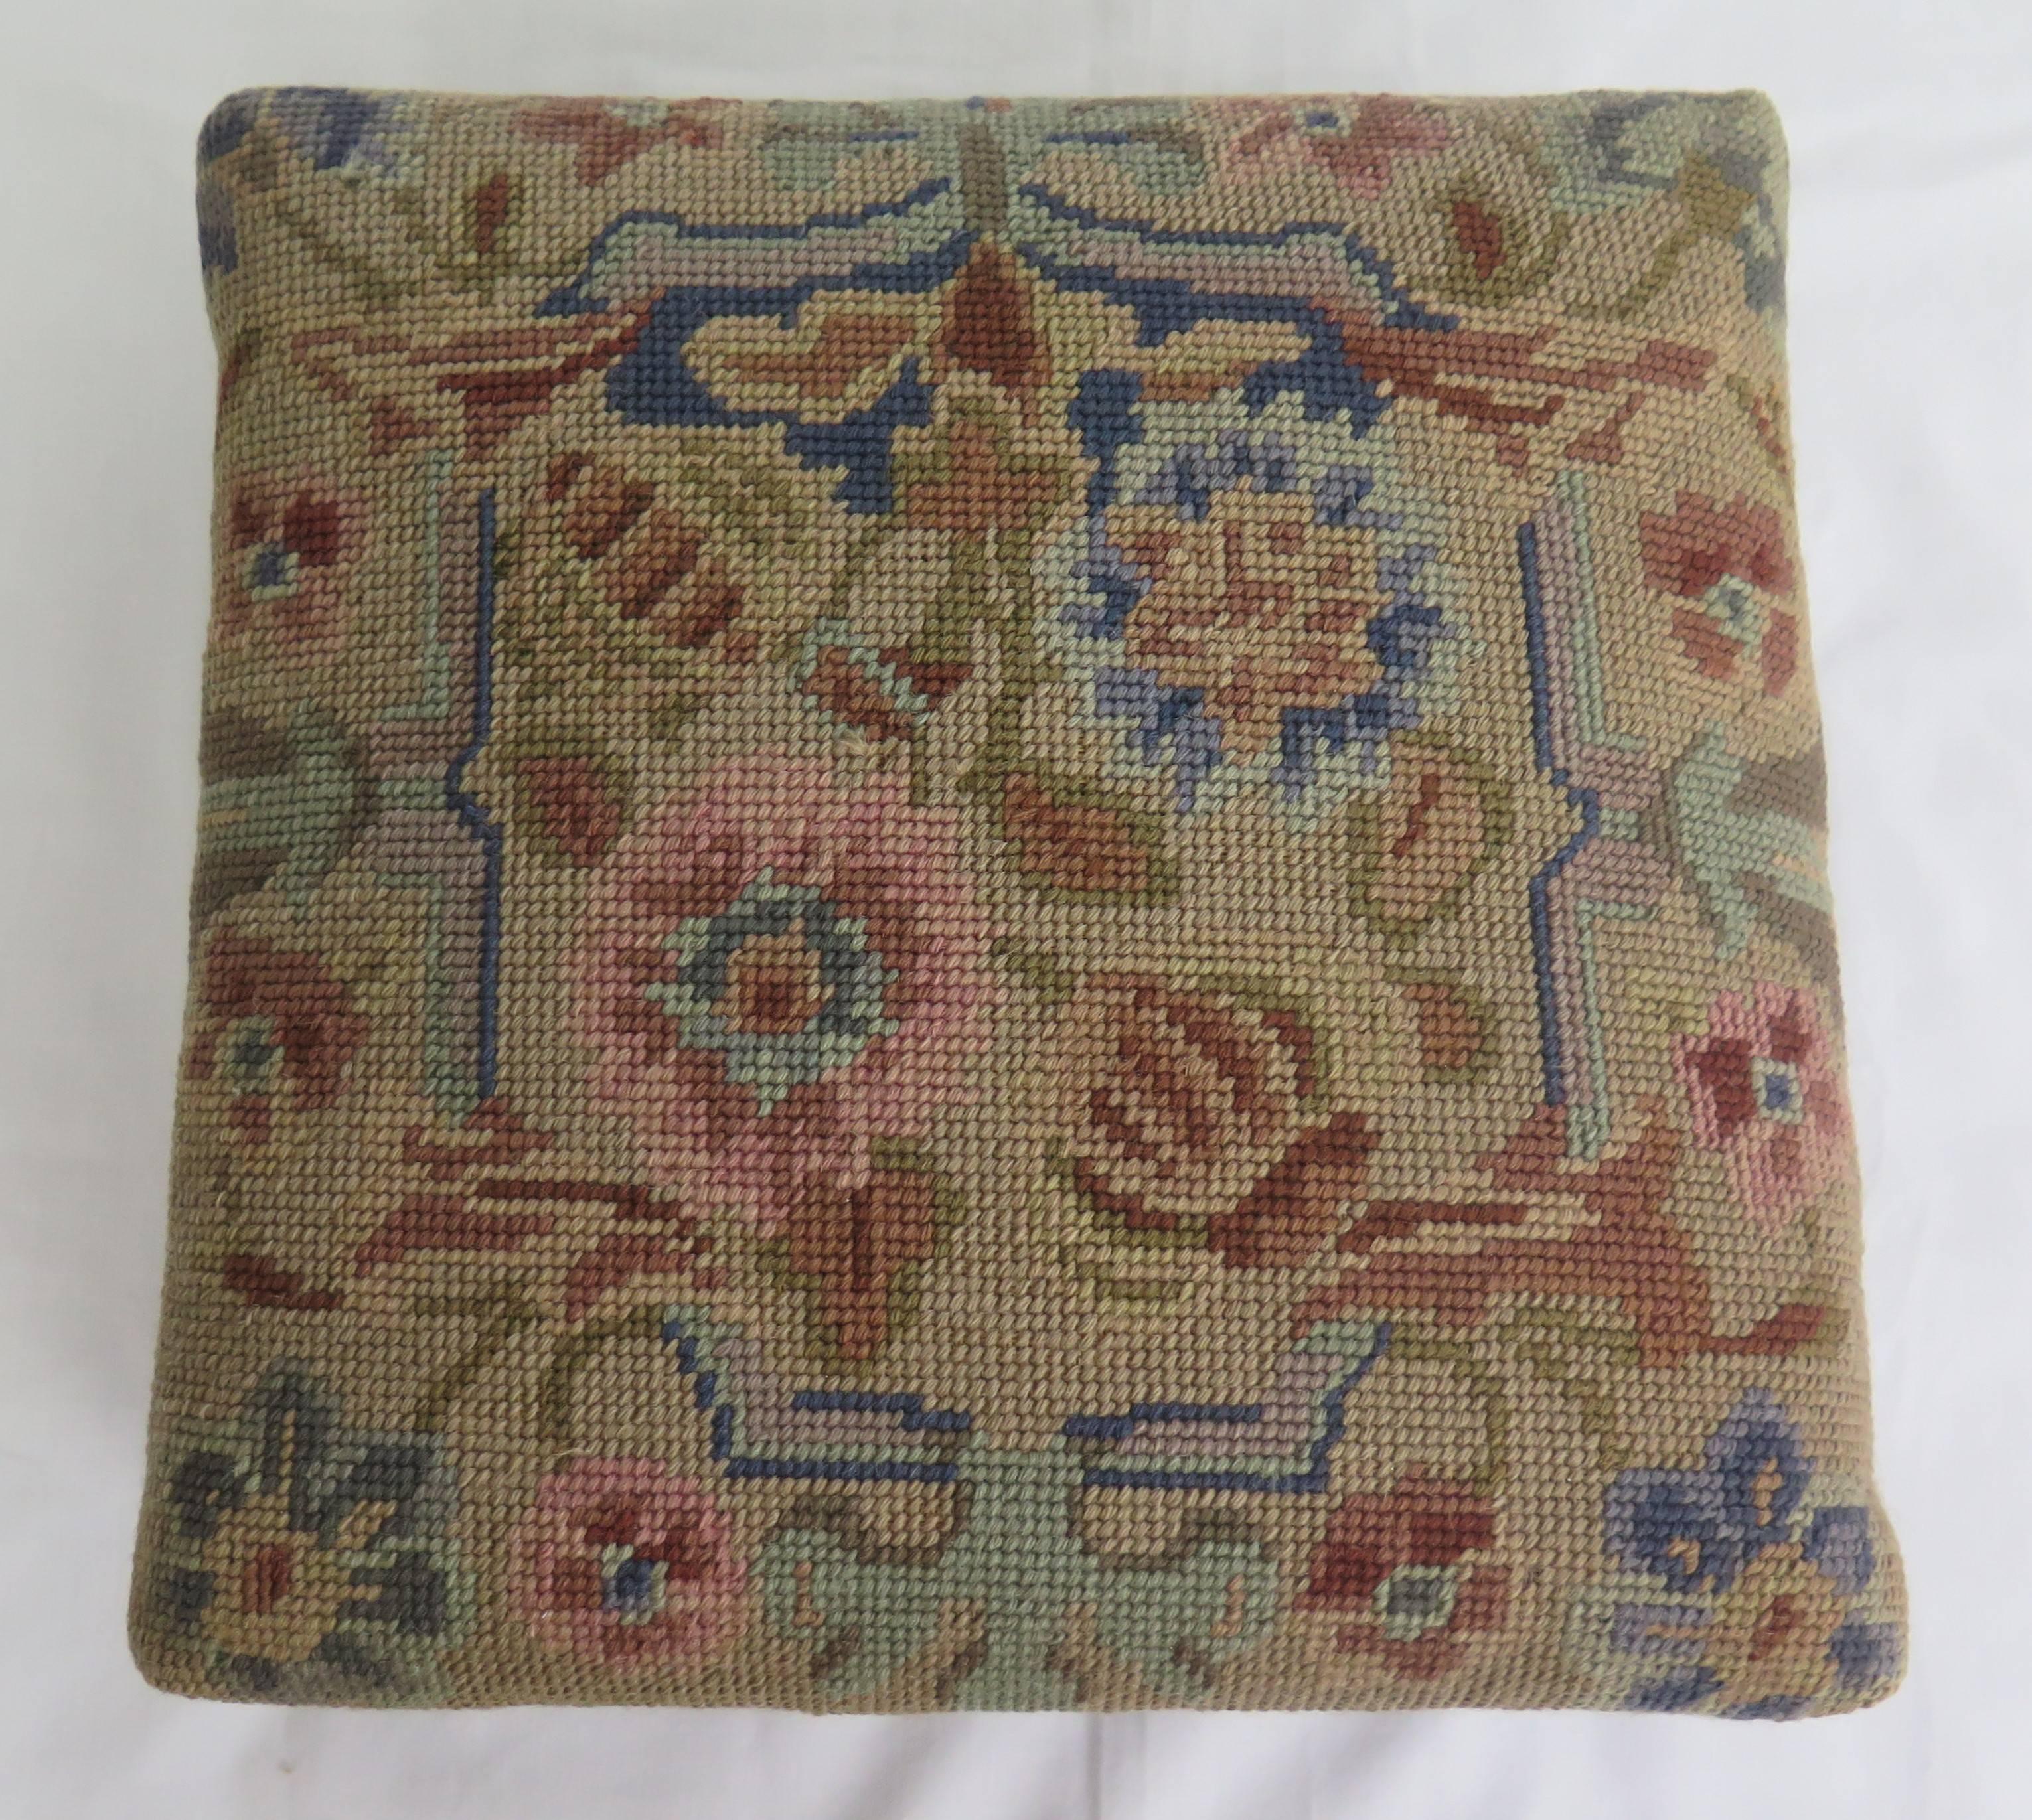 This is a good example of an English foot stool with a tapestry top dating to the late 19th century of the Victorian period.

The stool has a square shaped oak frame sitting on four turned oak bun feet. The top is upholstered in a hand-stitched